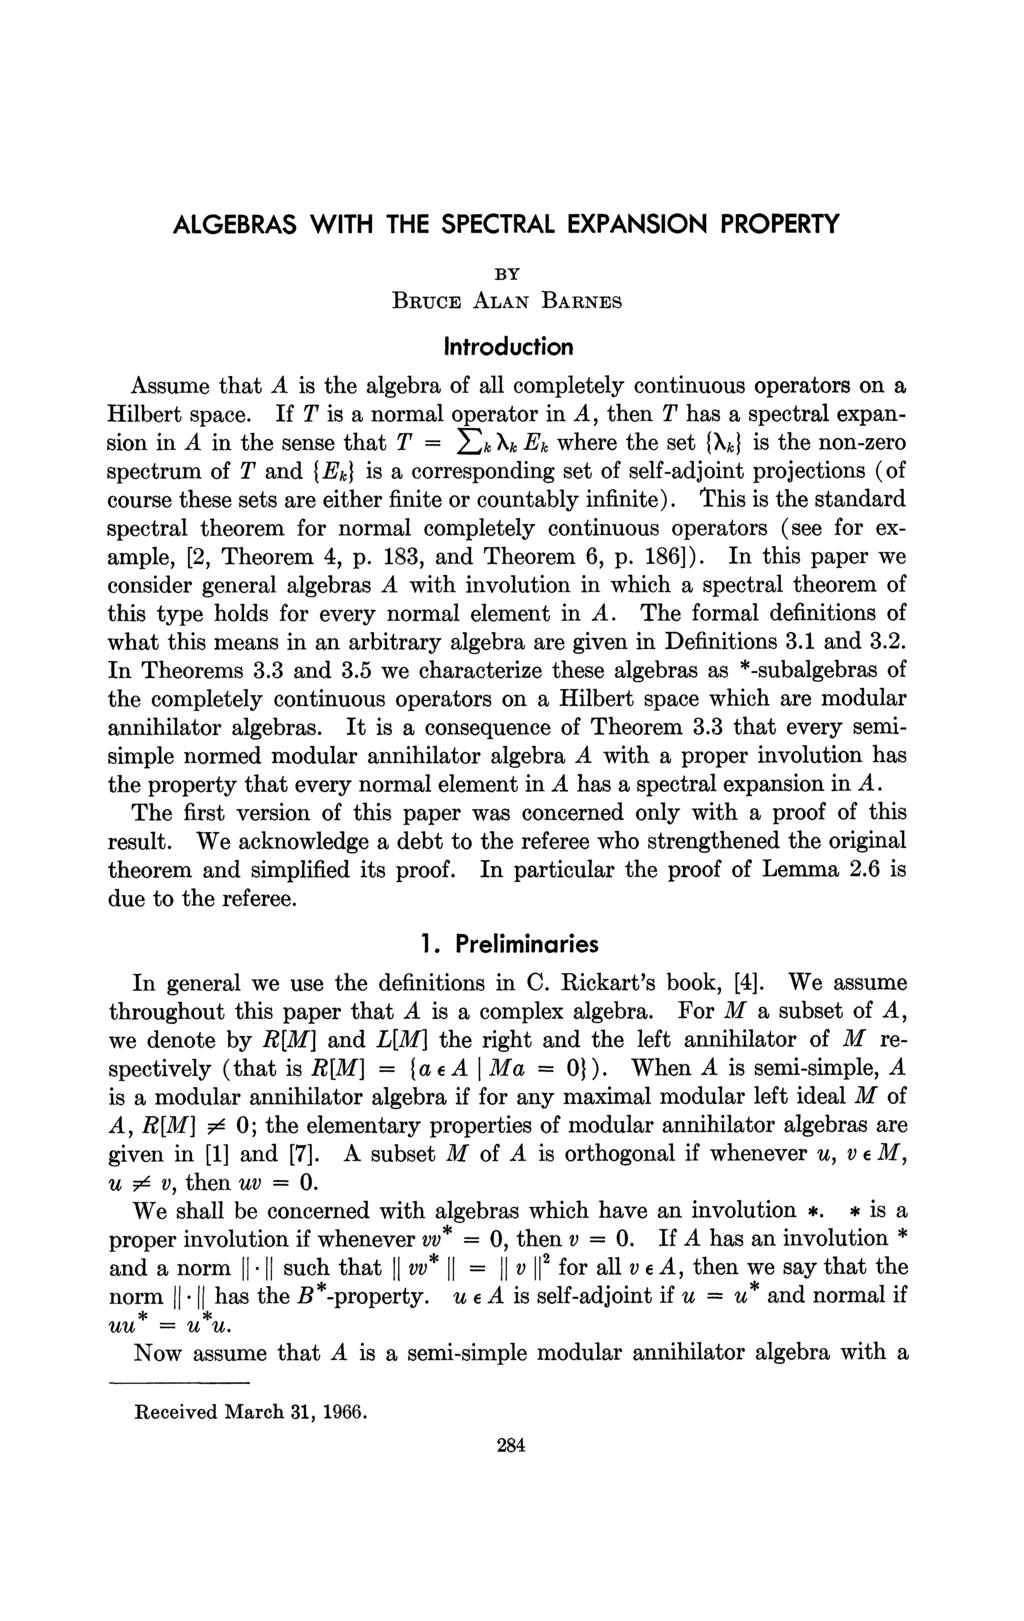 ALGEBRAS WITH THE SPECTRAL EXPANSION PROPERTY BY BRUCE ALAN BARNES Introduction Assume that A is the algebra of all completely continuous operators on a Hilbert space.